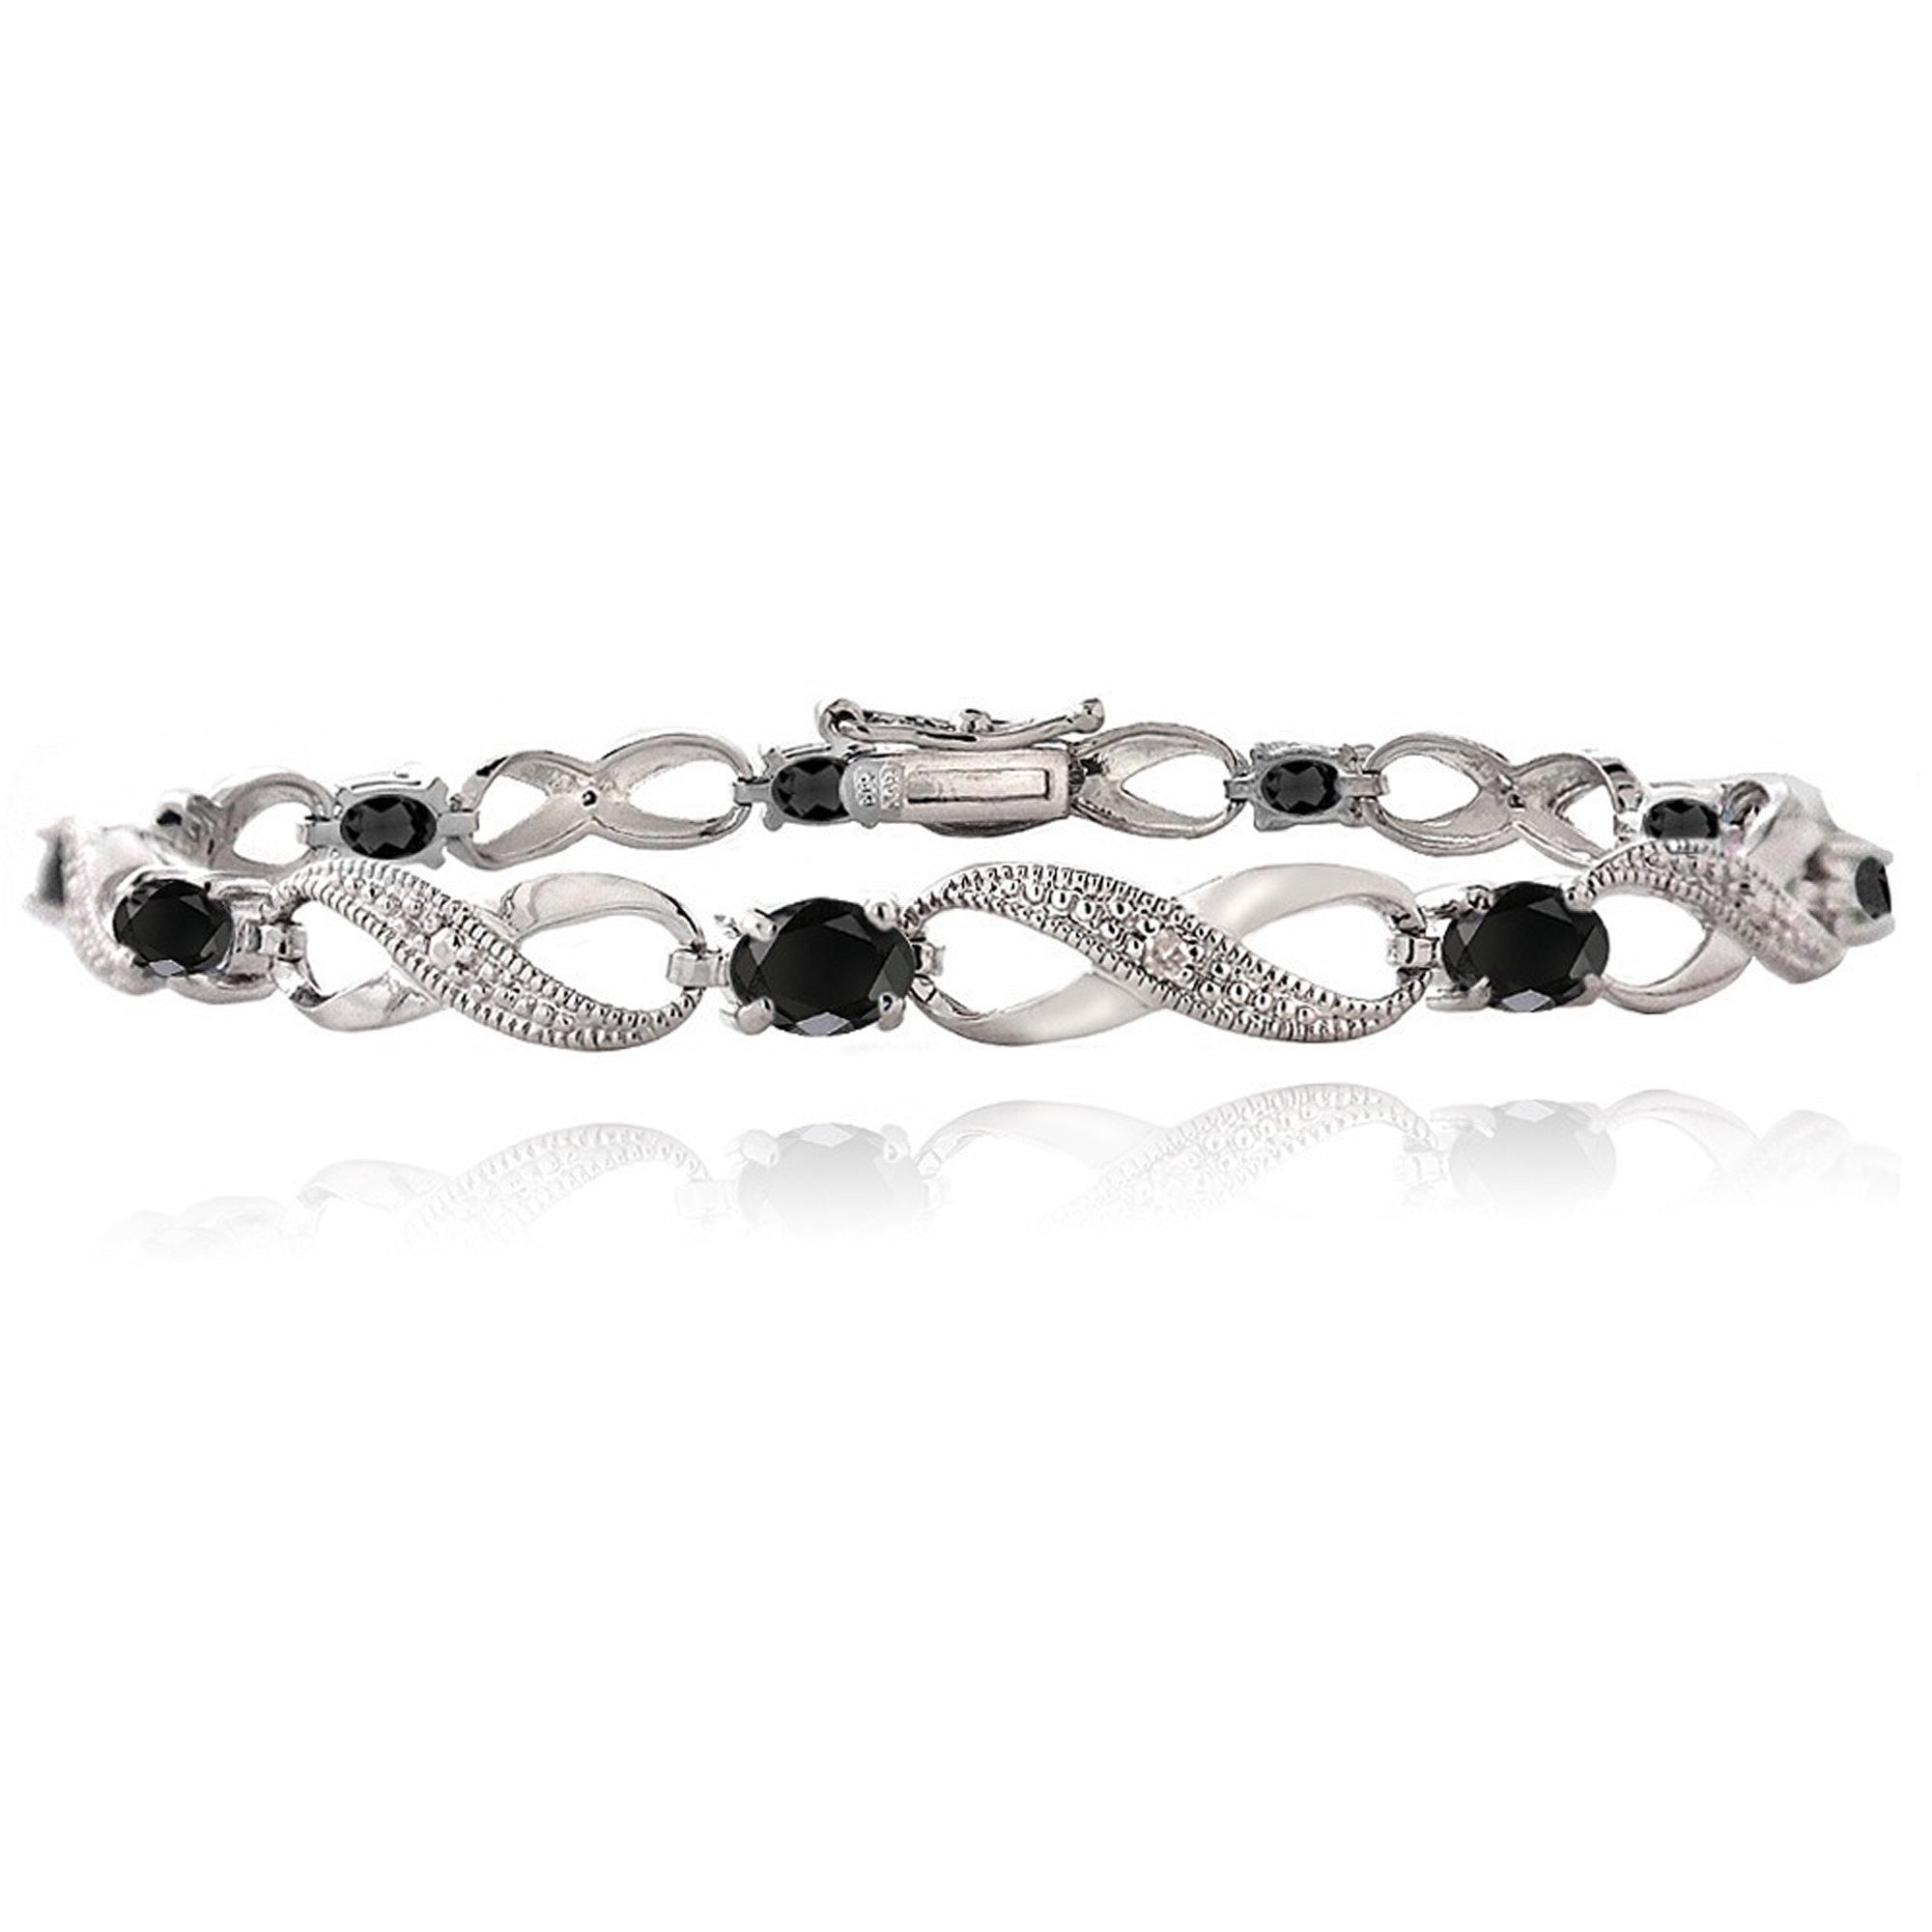 Infinity Bracelet With Diamond & Gem Accents in a Linked Style - Sapphire